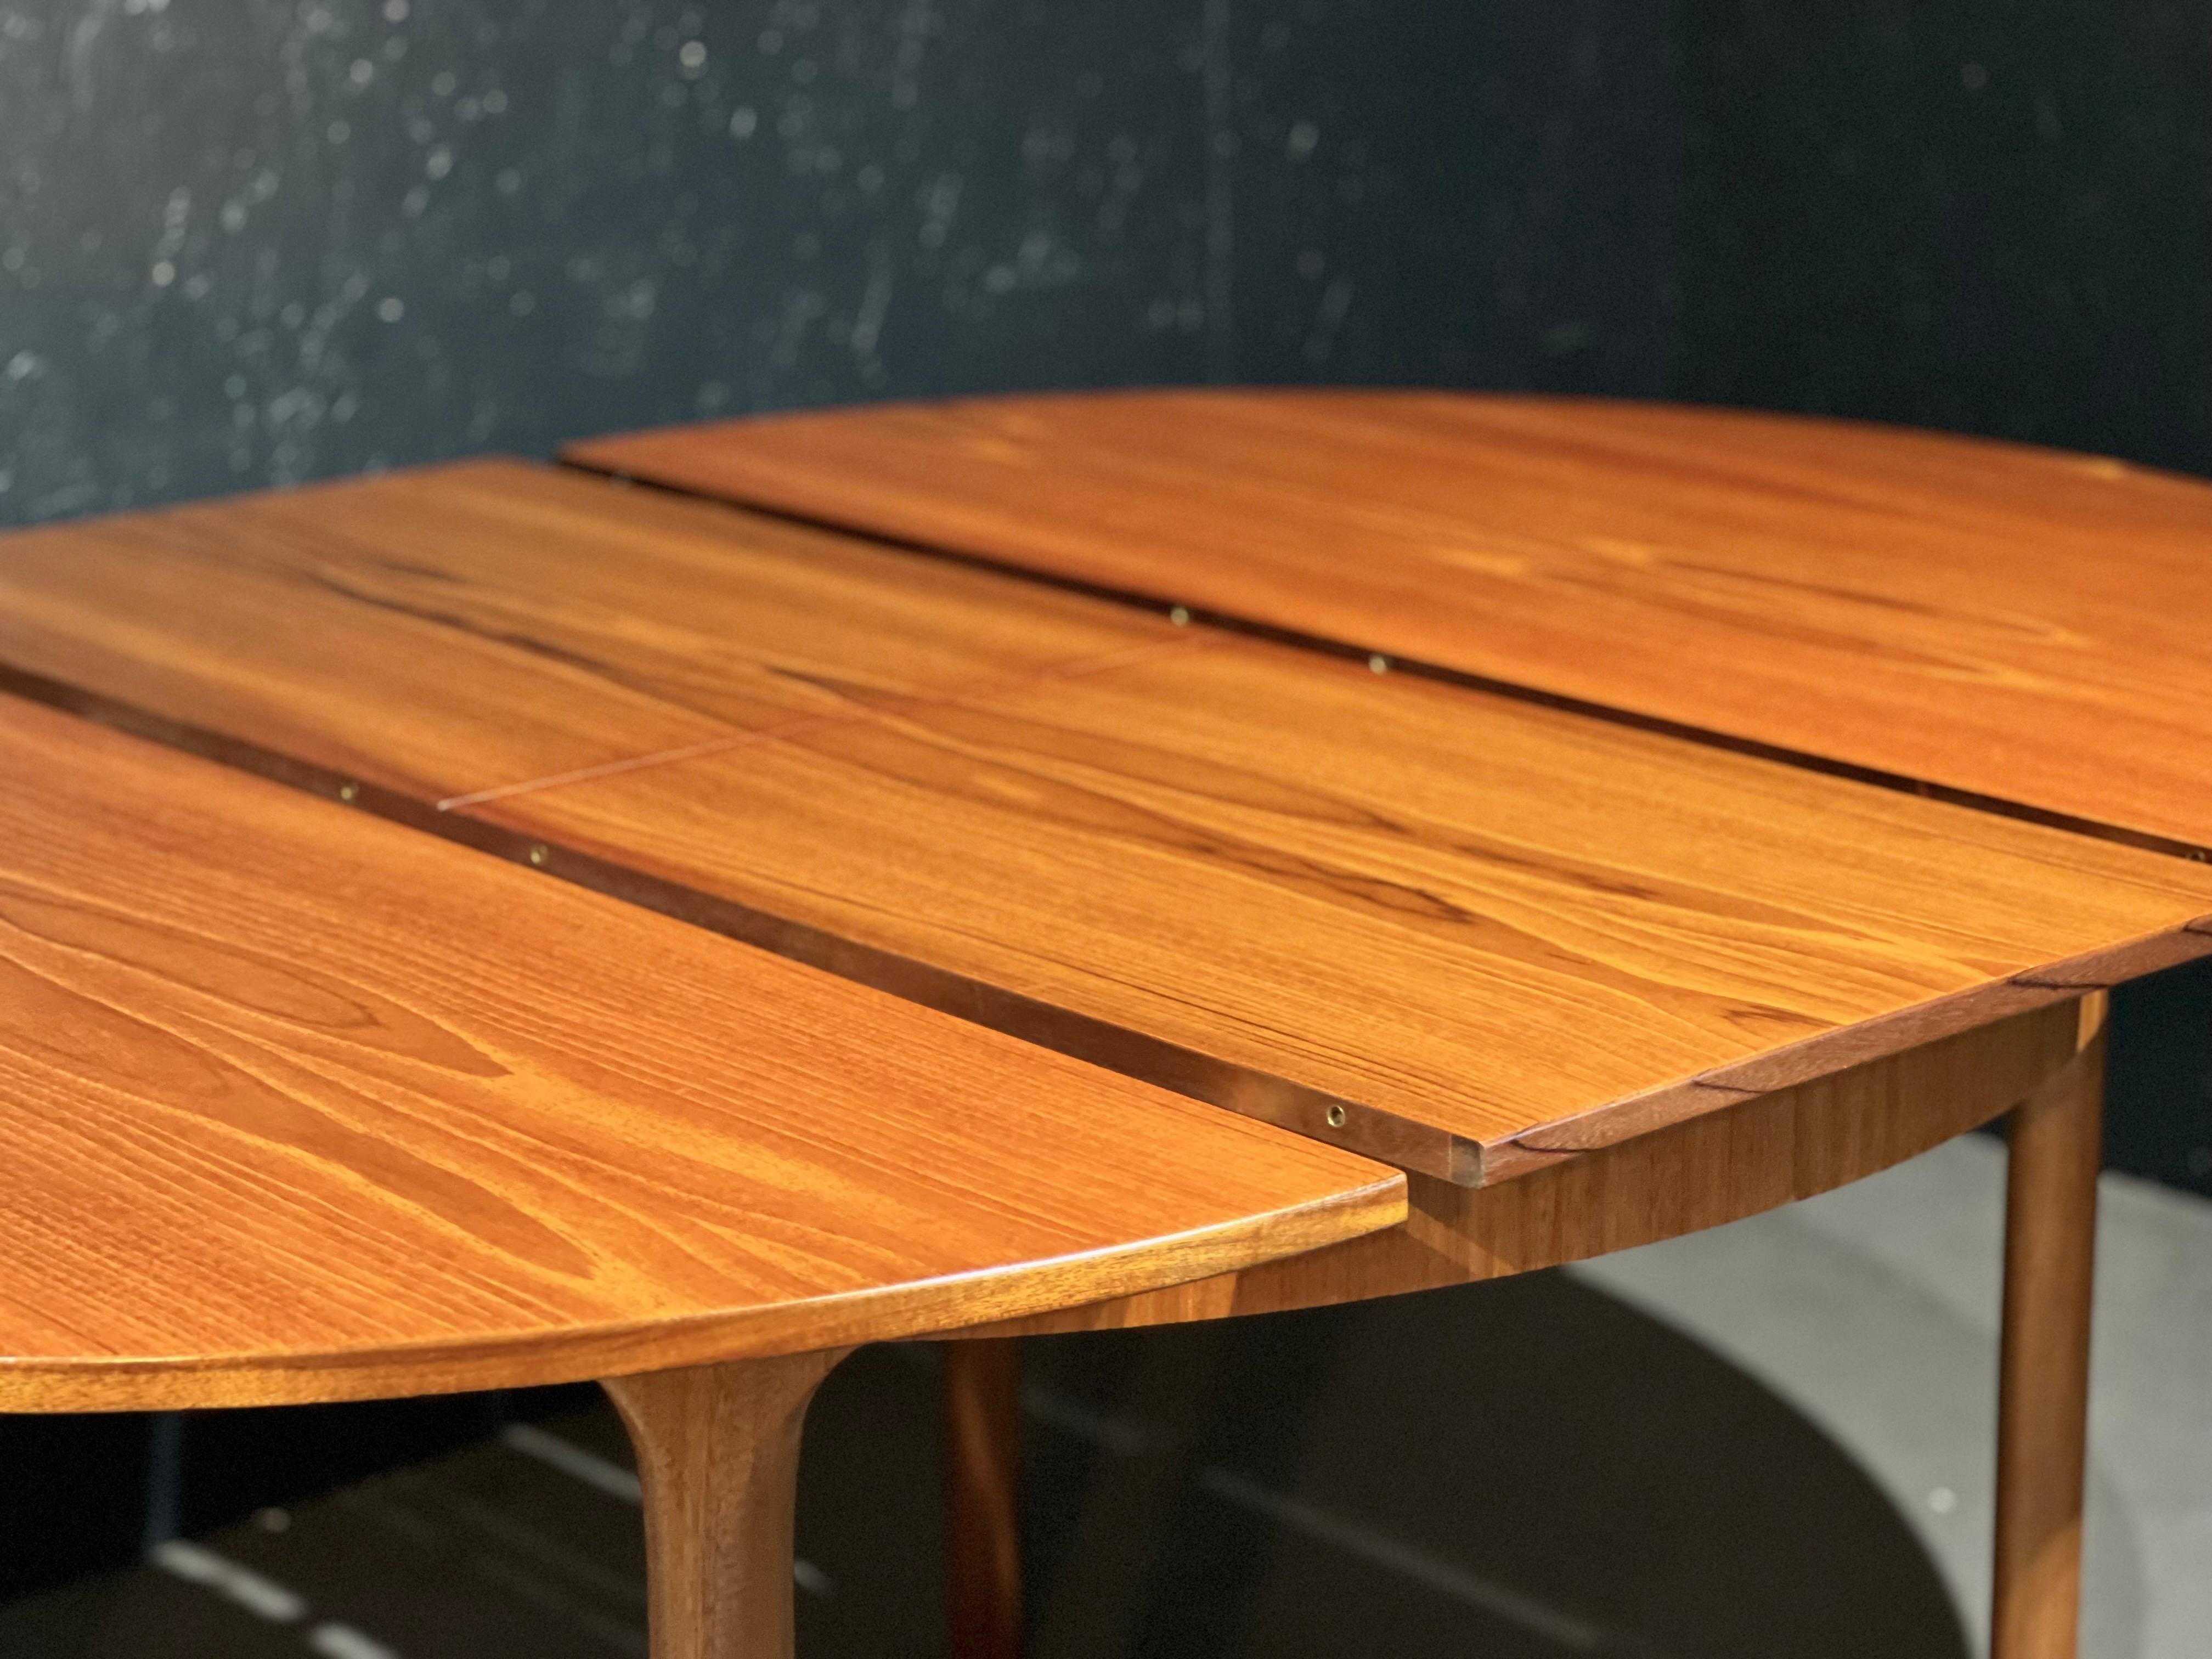 McIntosh table and chairs set.

The set is composed of the following:

Extendable round table in teak, belonging to the Dunvegan collection that Tom Robertson designed in the 1960s in Scotland.
The table has a solid teak structure, elegant